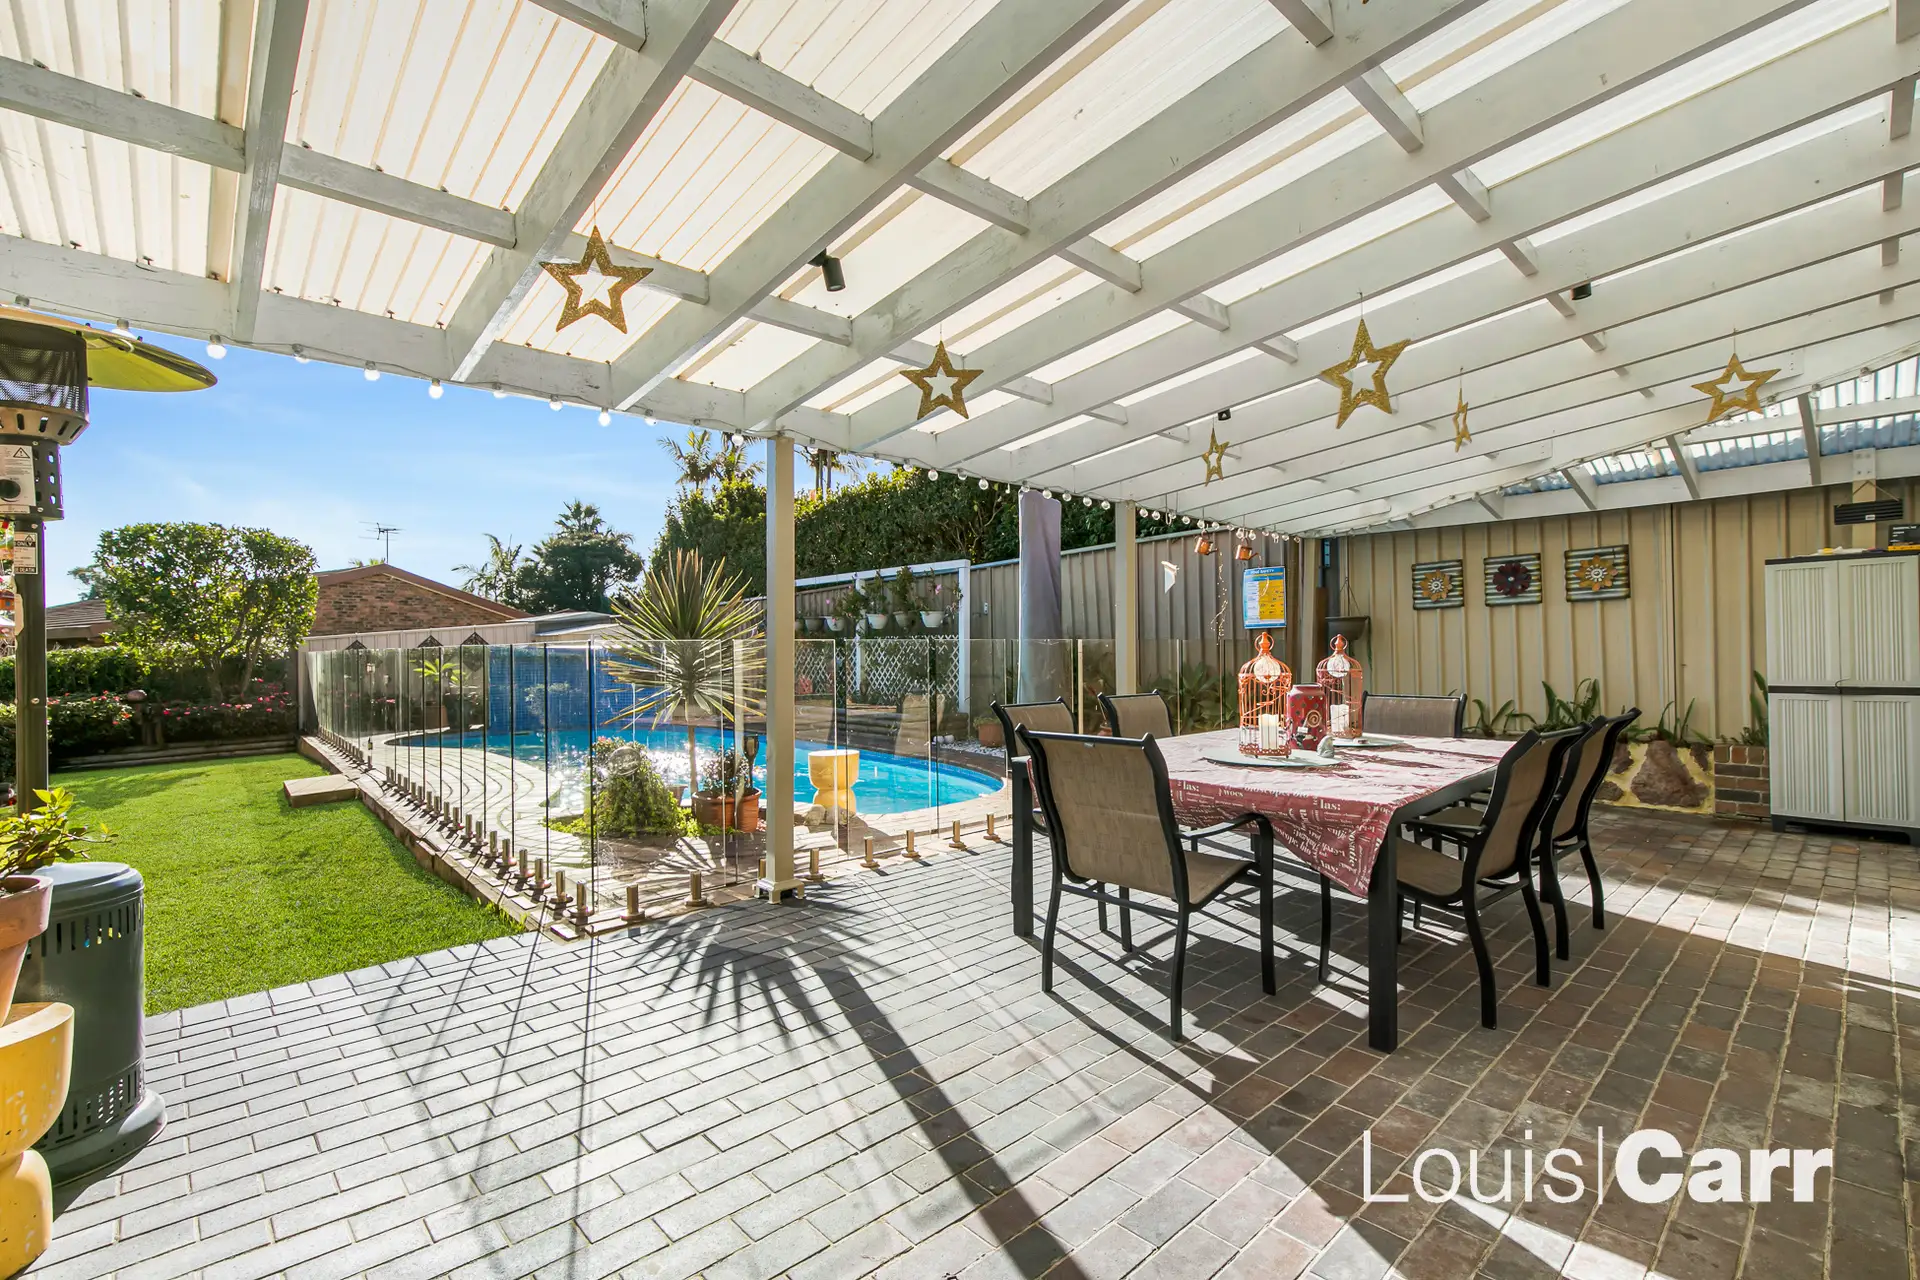 Photo #6: 195 Purchase Road, Cherrybrook - Sold by Louis Carr Real Estate